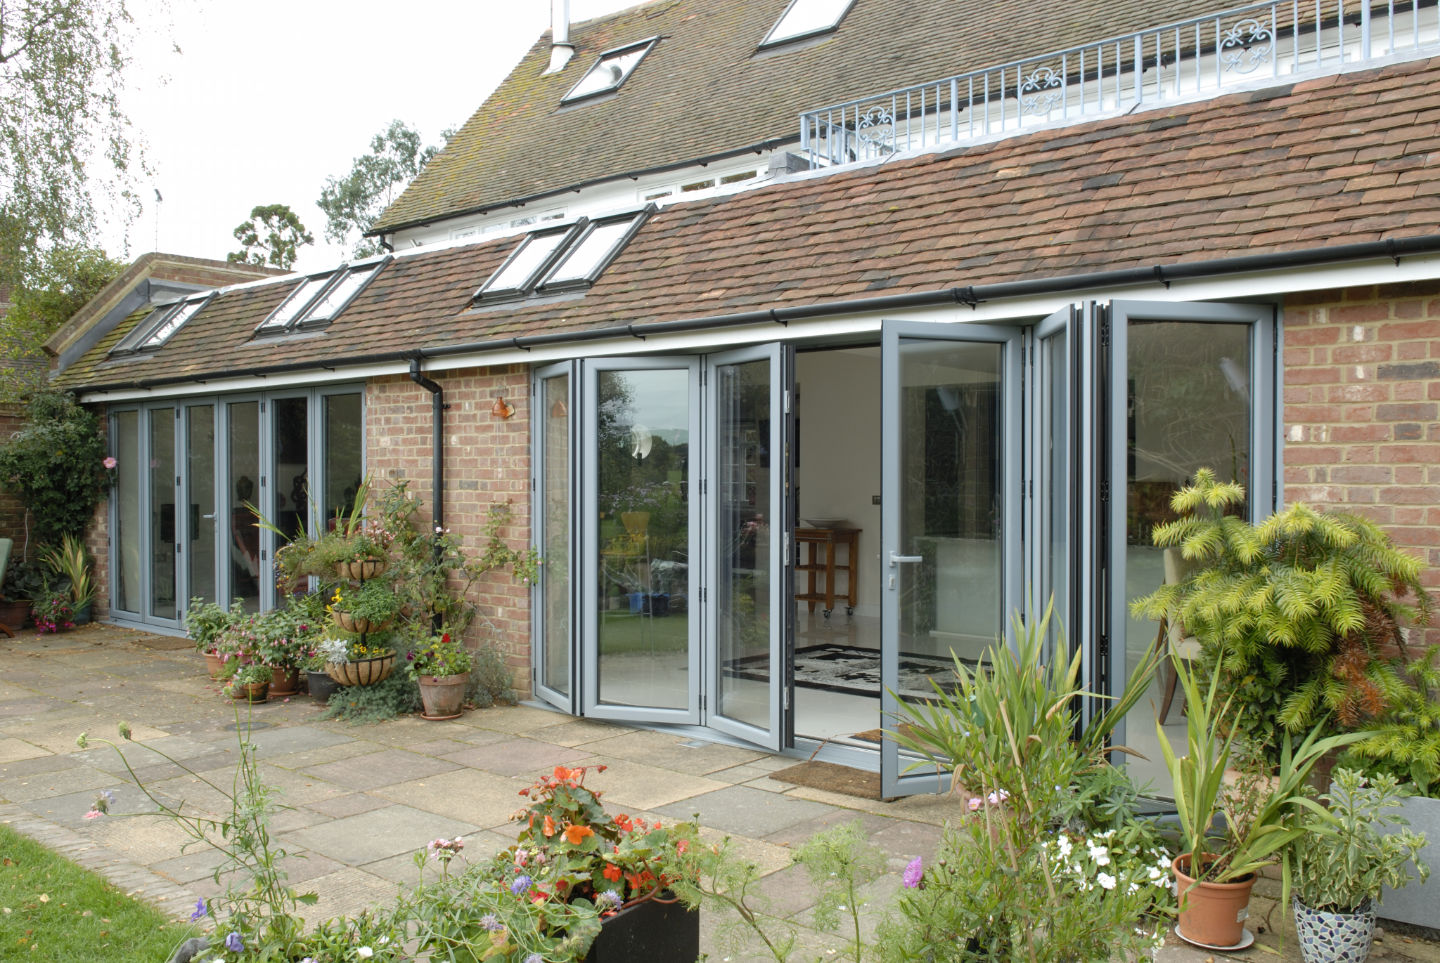 Bifolding doors on an older property, looking from the garden